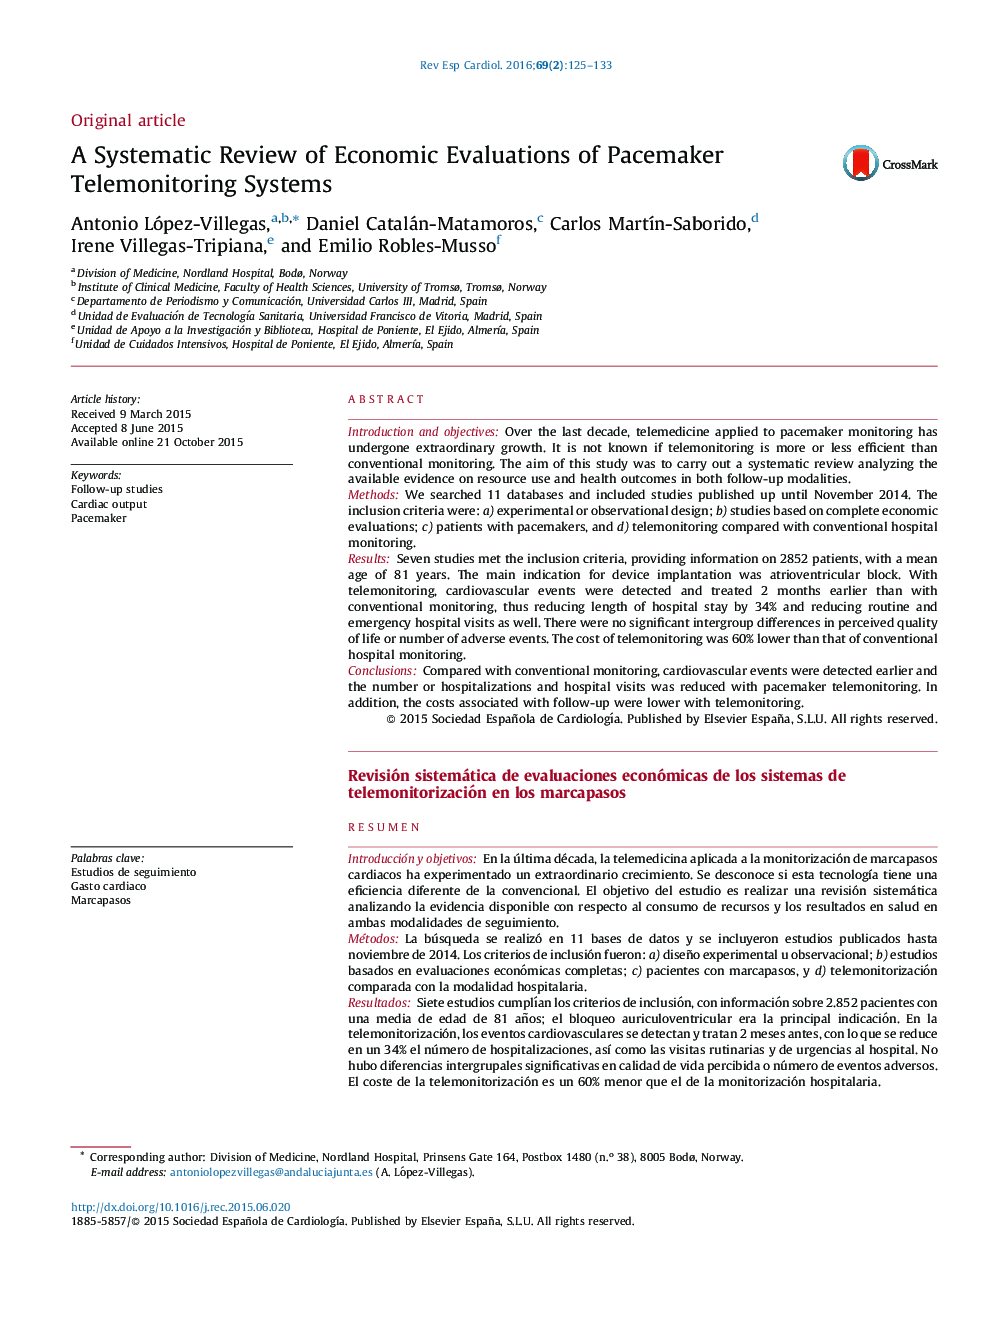 A Systematic Review of Economic Evaluations of Pacemaker Telemonitoring Systems